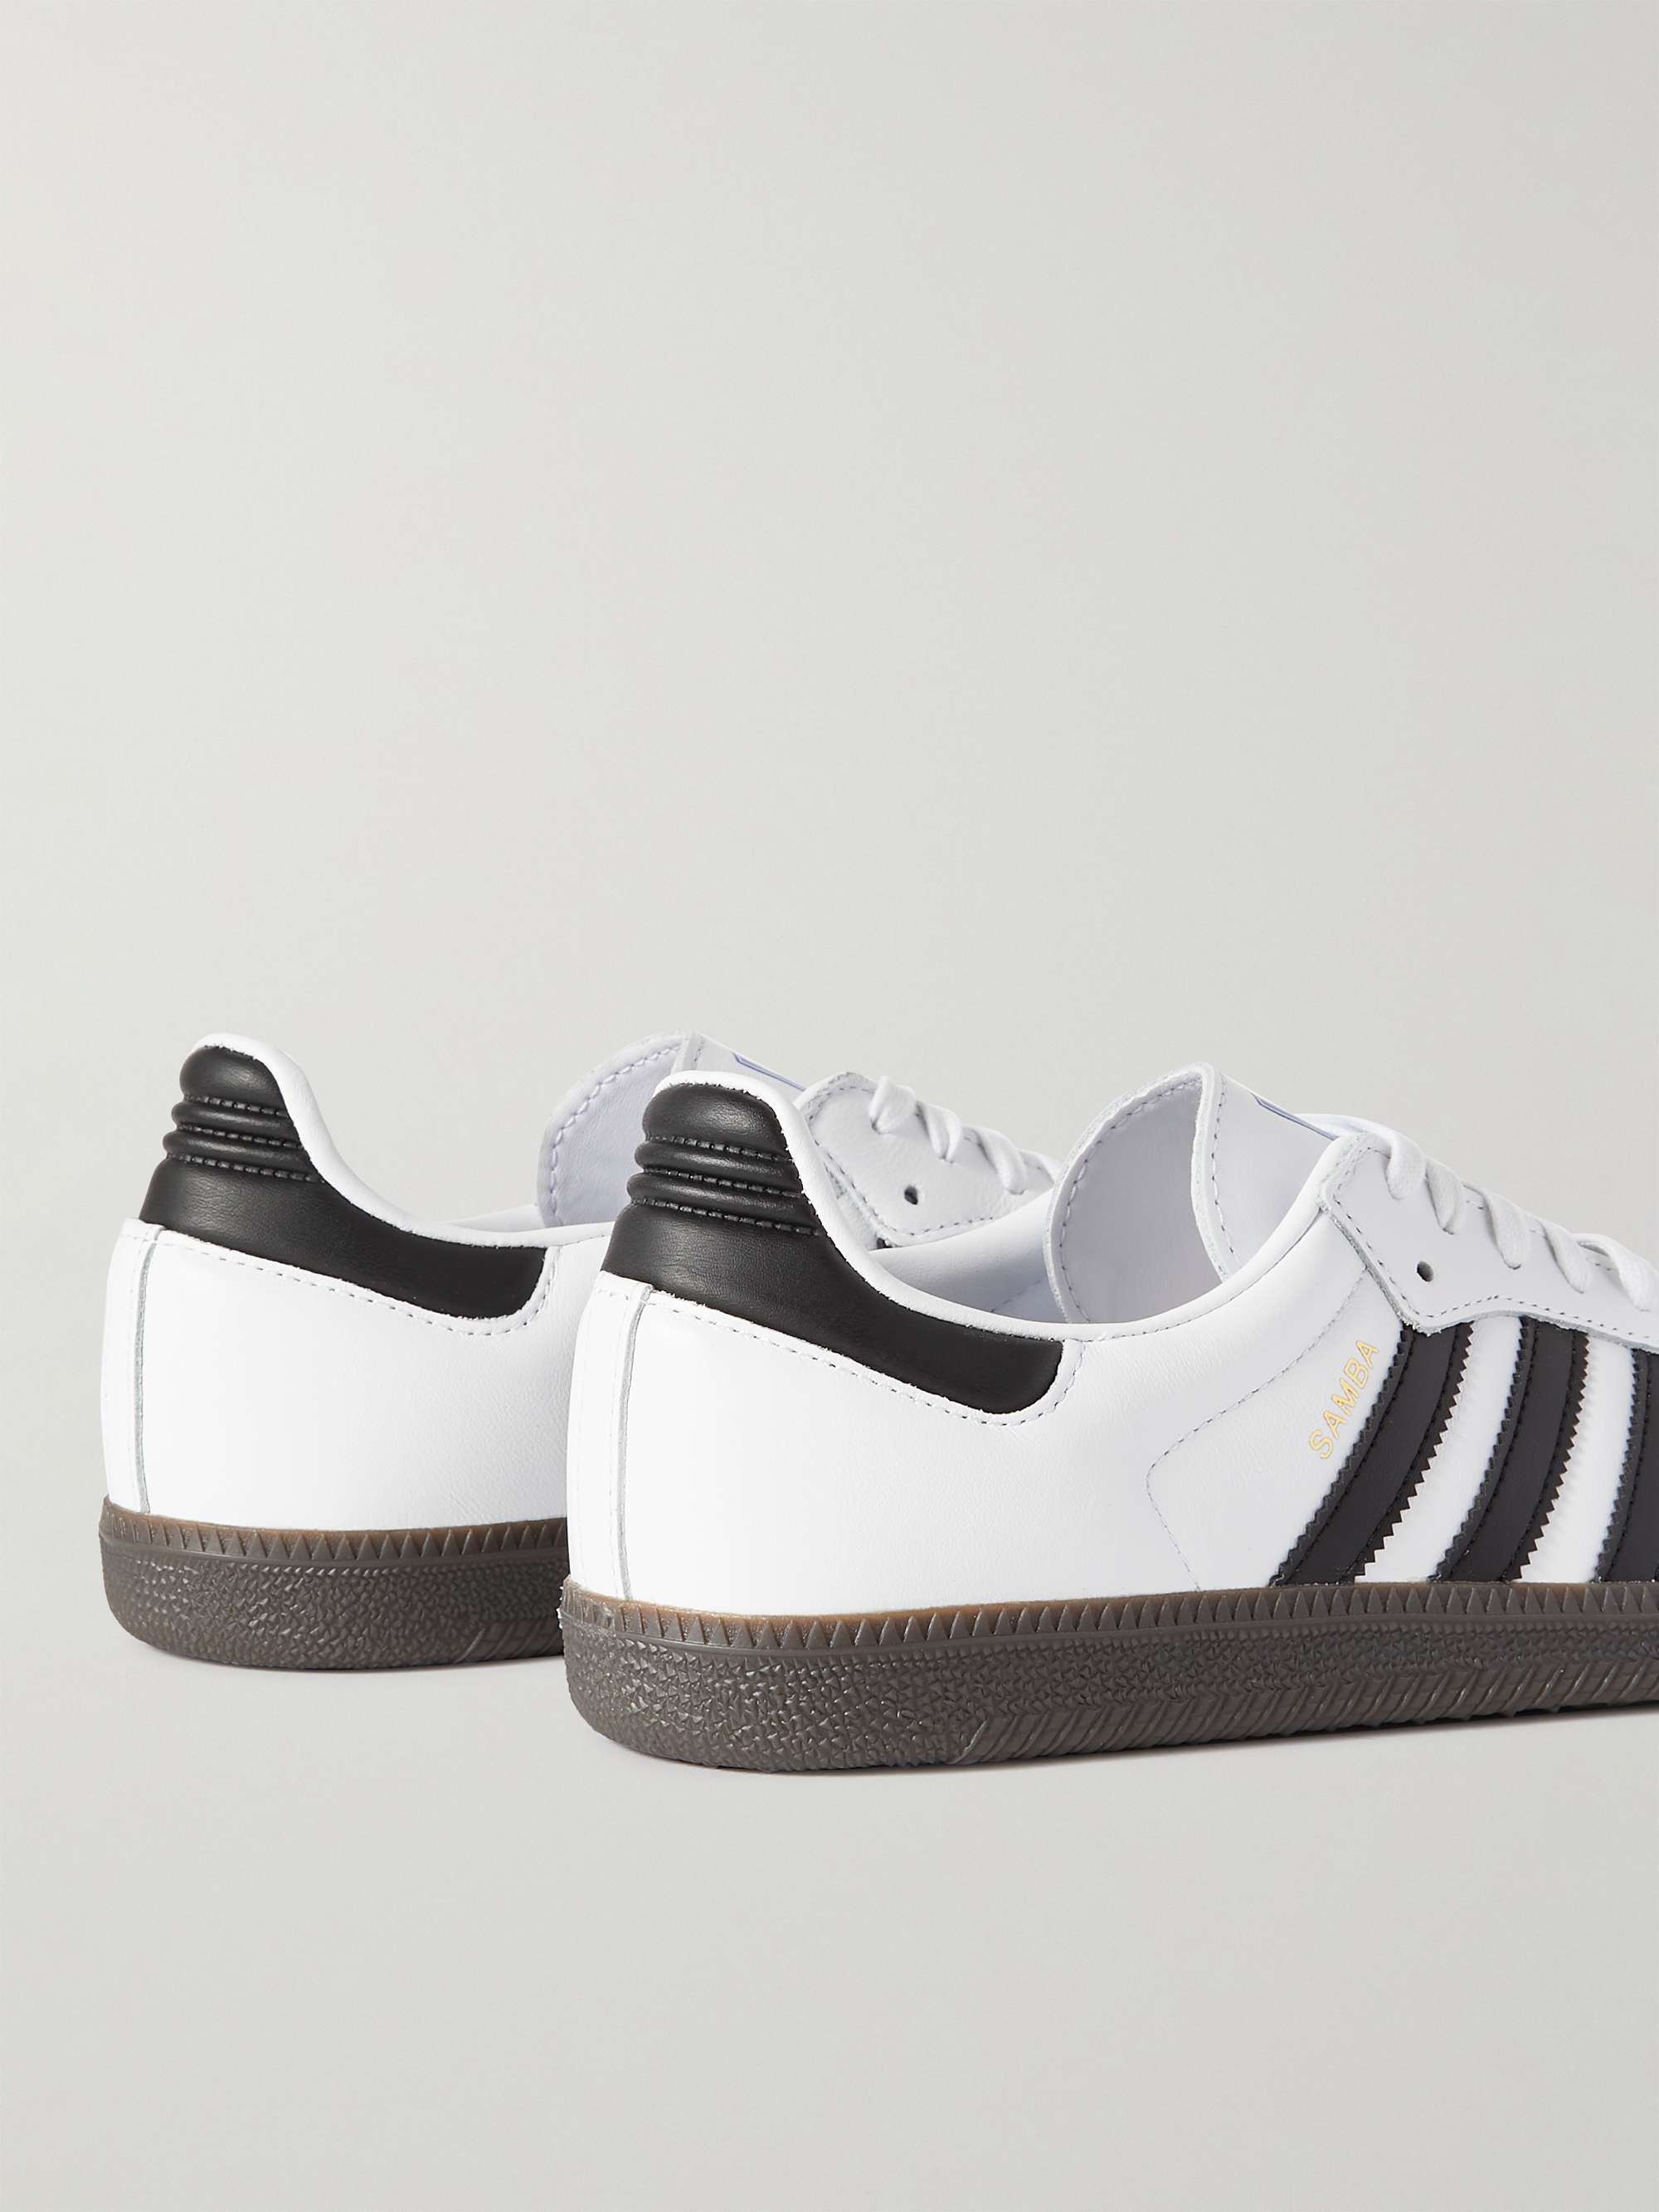 White Samba Suede-Trimmed Leather Sneakers | ADIDAS ORIGINALS | MR PORTER